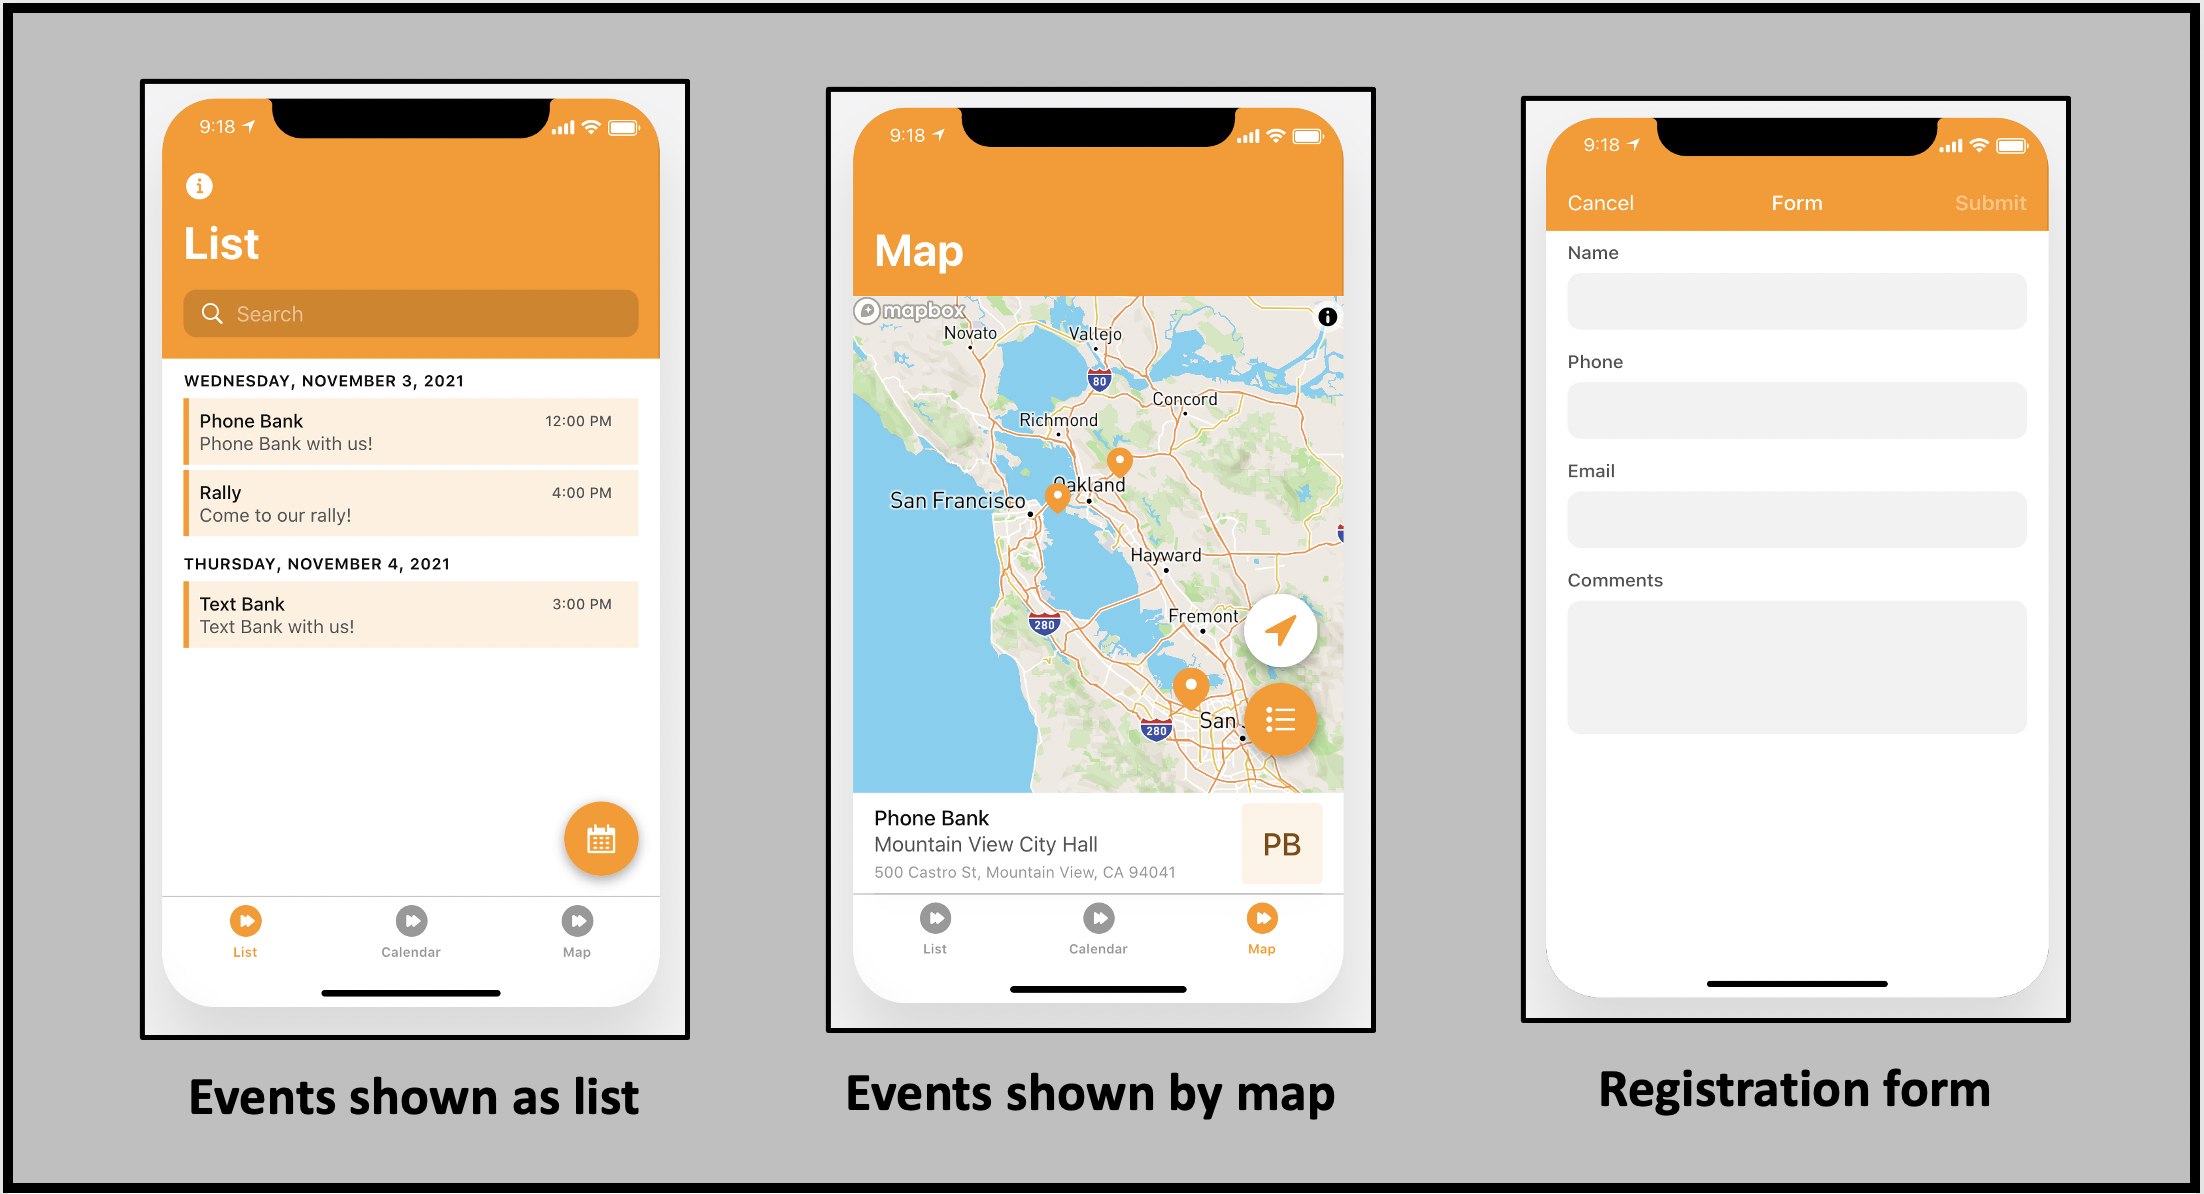 Share event details as a list, calendar or map to make it easy for people to sign up for them with the free SignMeUp app.